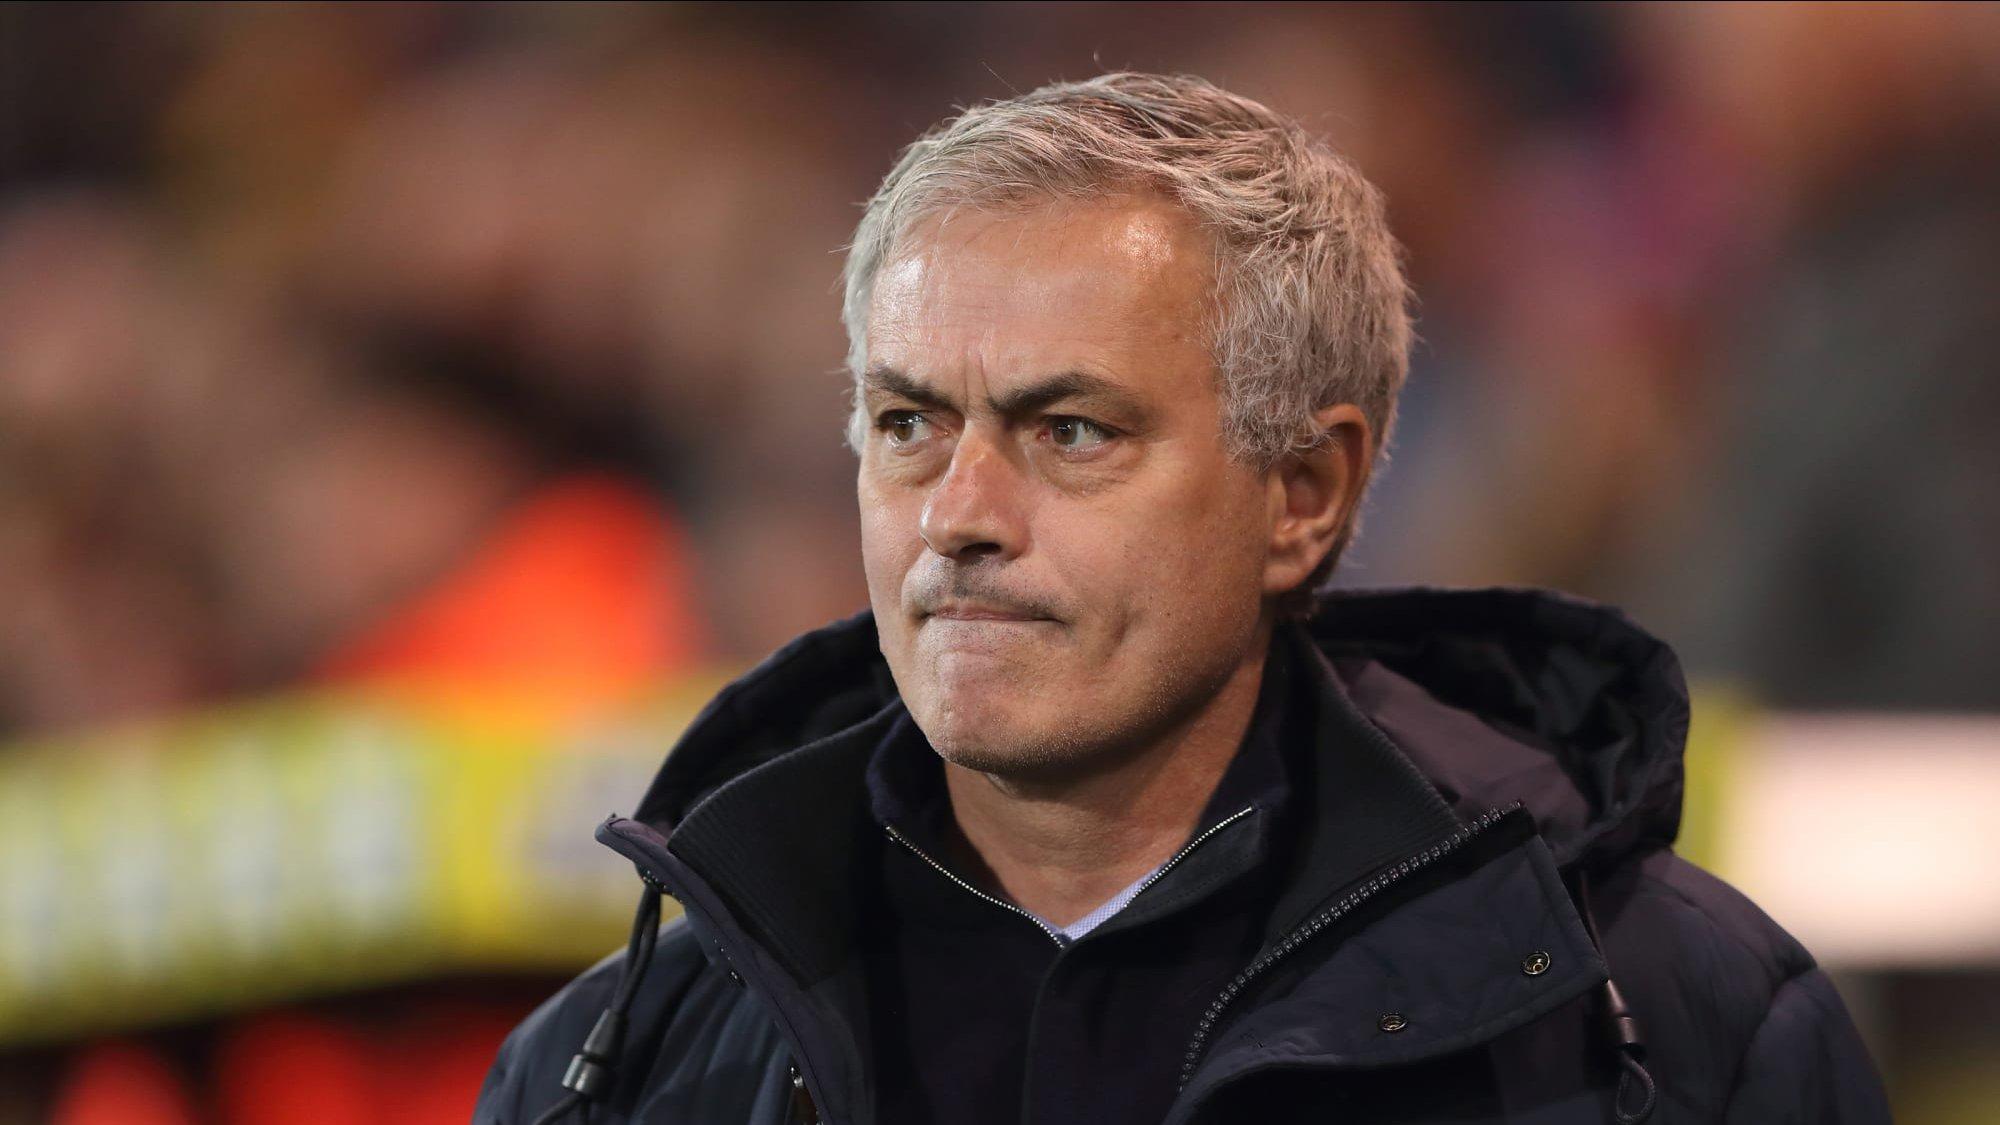 Roma vs. Feyenoord Europa Conference League Final: The Special One’s Experience Will Show